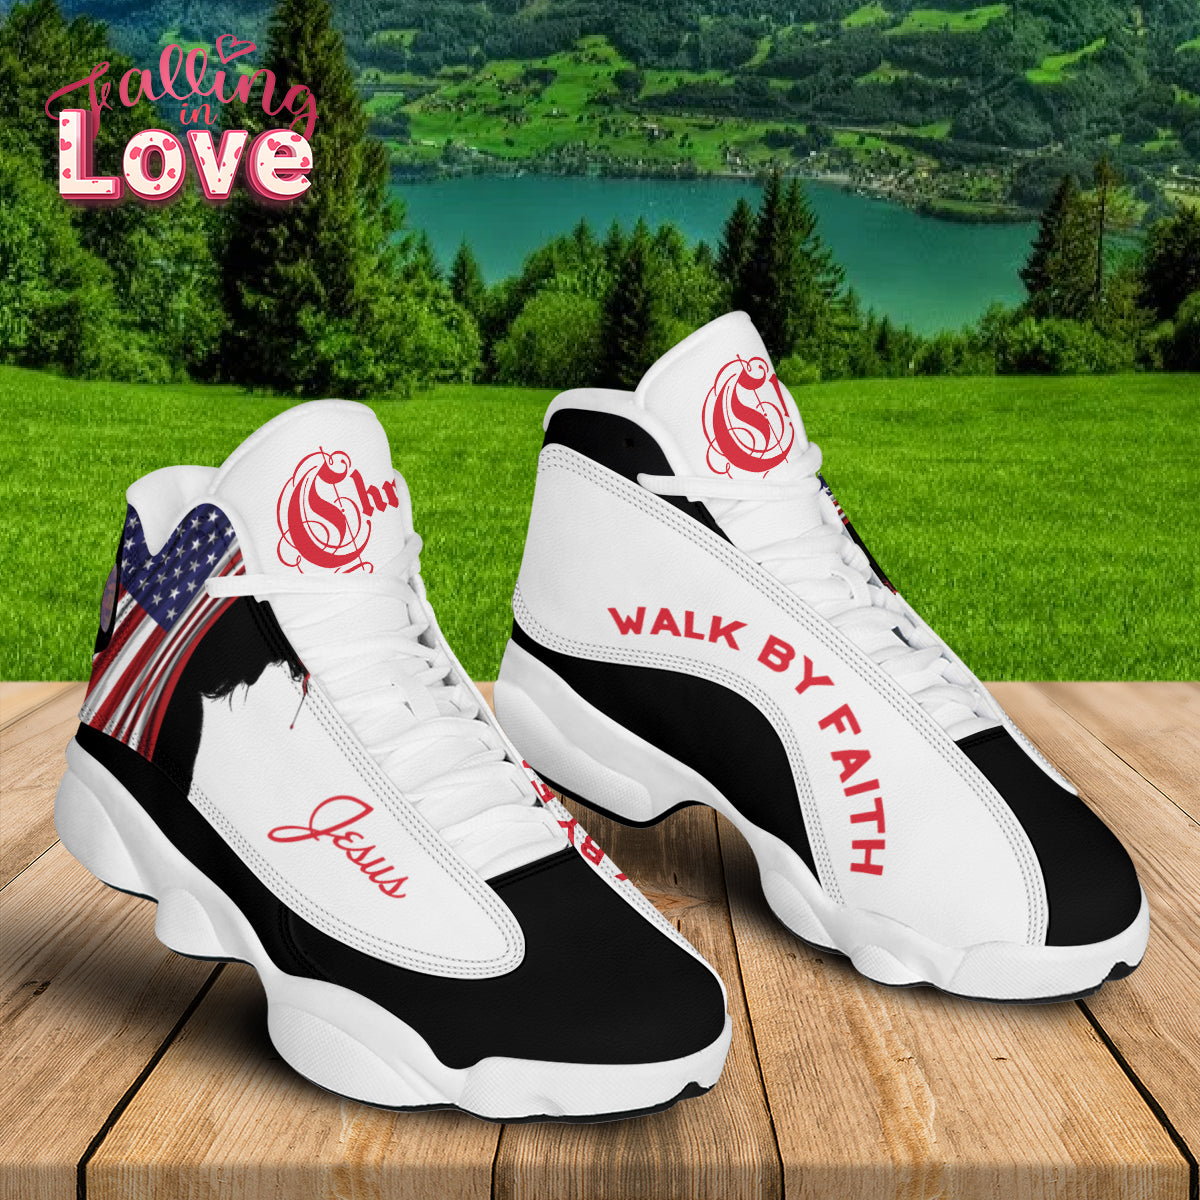 Jesus Walk By Faith Basketball Shoes For Men Women - Christian Shoes - Jesus Shoes - Unisex Basketball Shoes